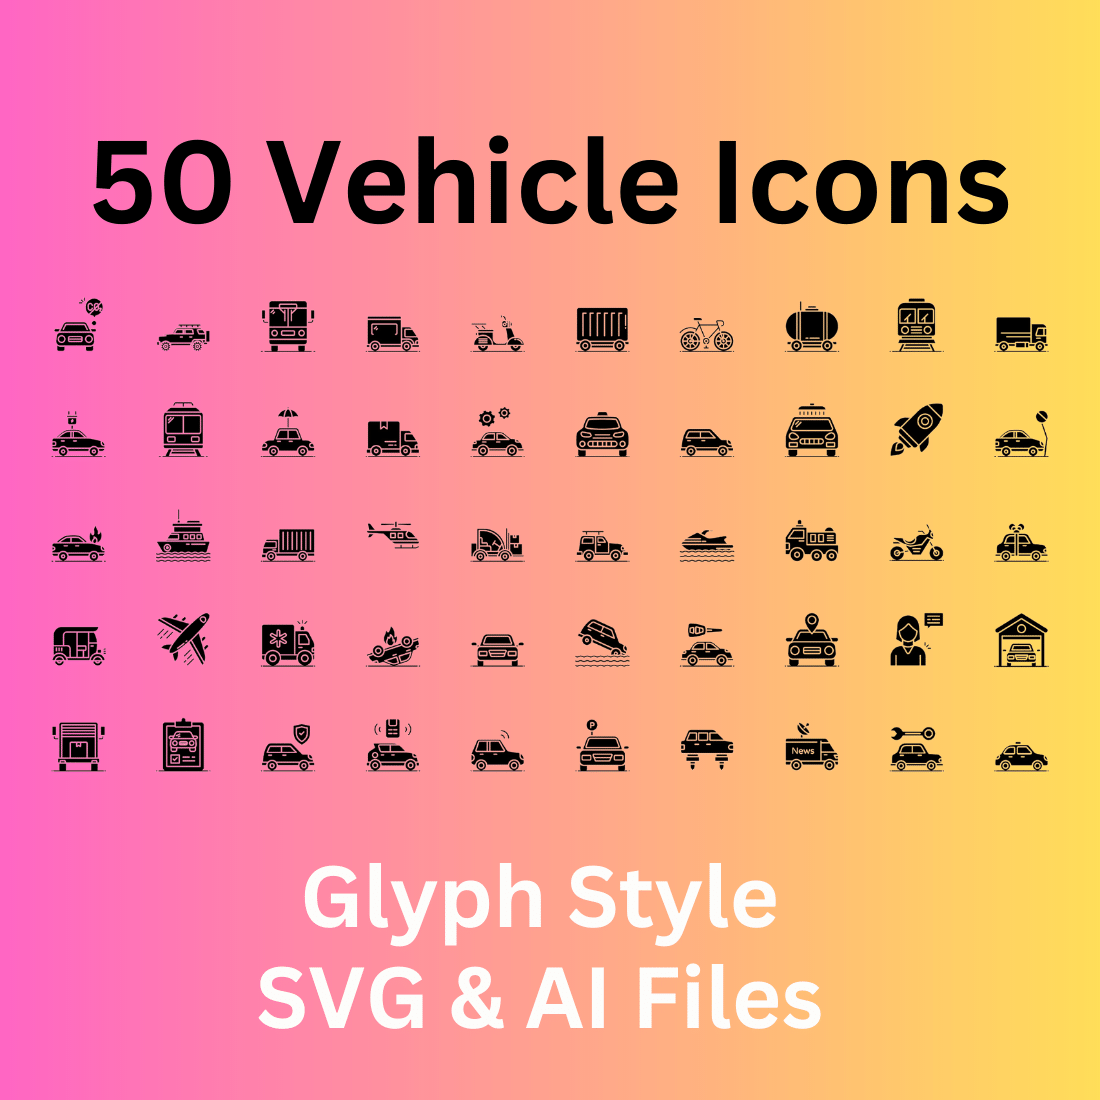 Vehicle Set 50 Glyph Icons - SVG And AI Files cover image.